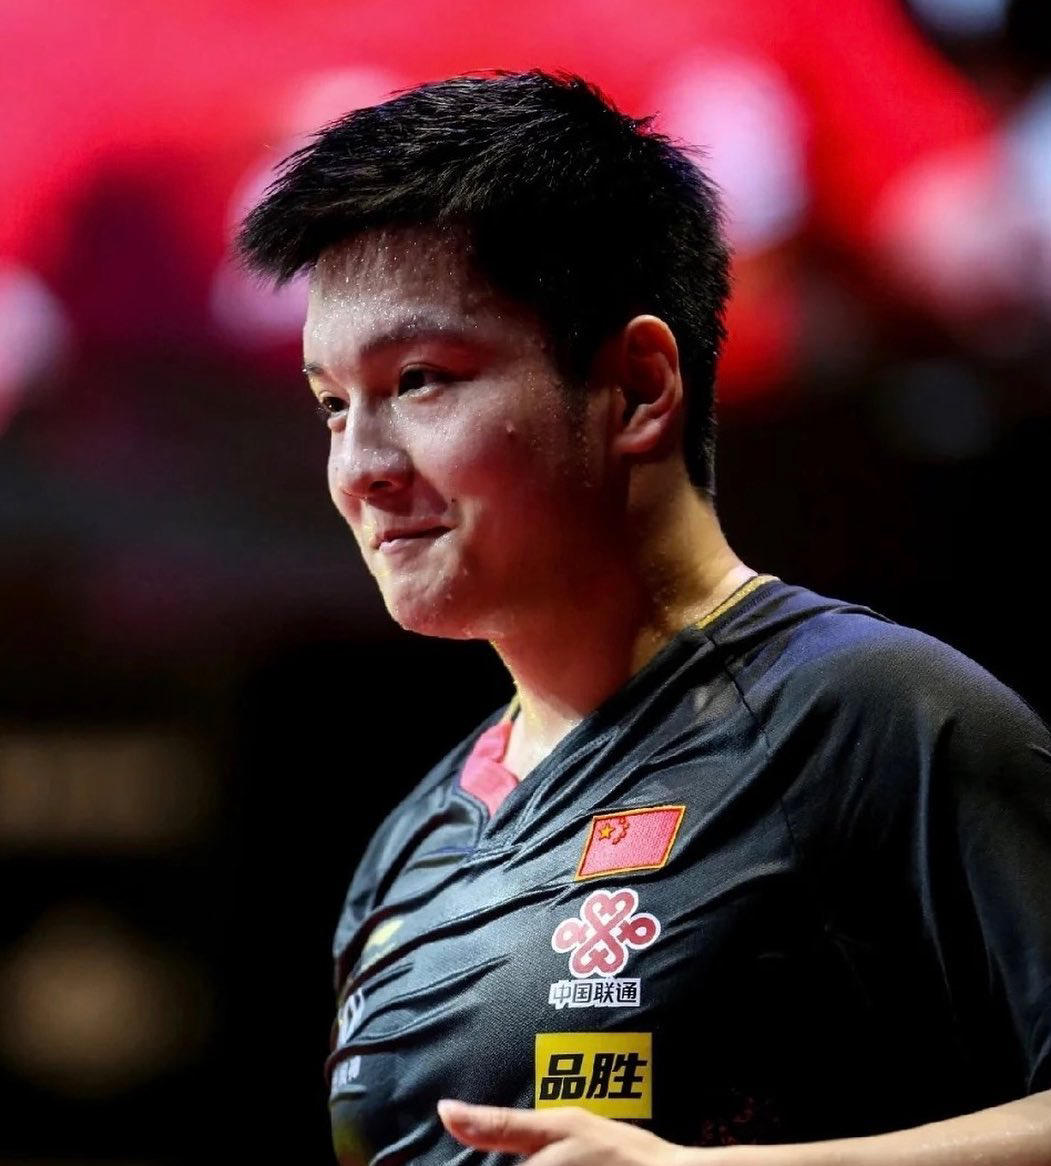 FanZhendong 樊振東 小胖 东哥 - I’m unstoppable, I’m a Porsche with no brakes